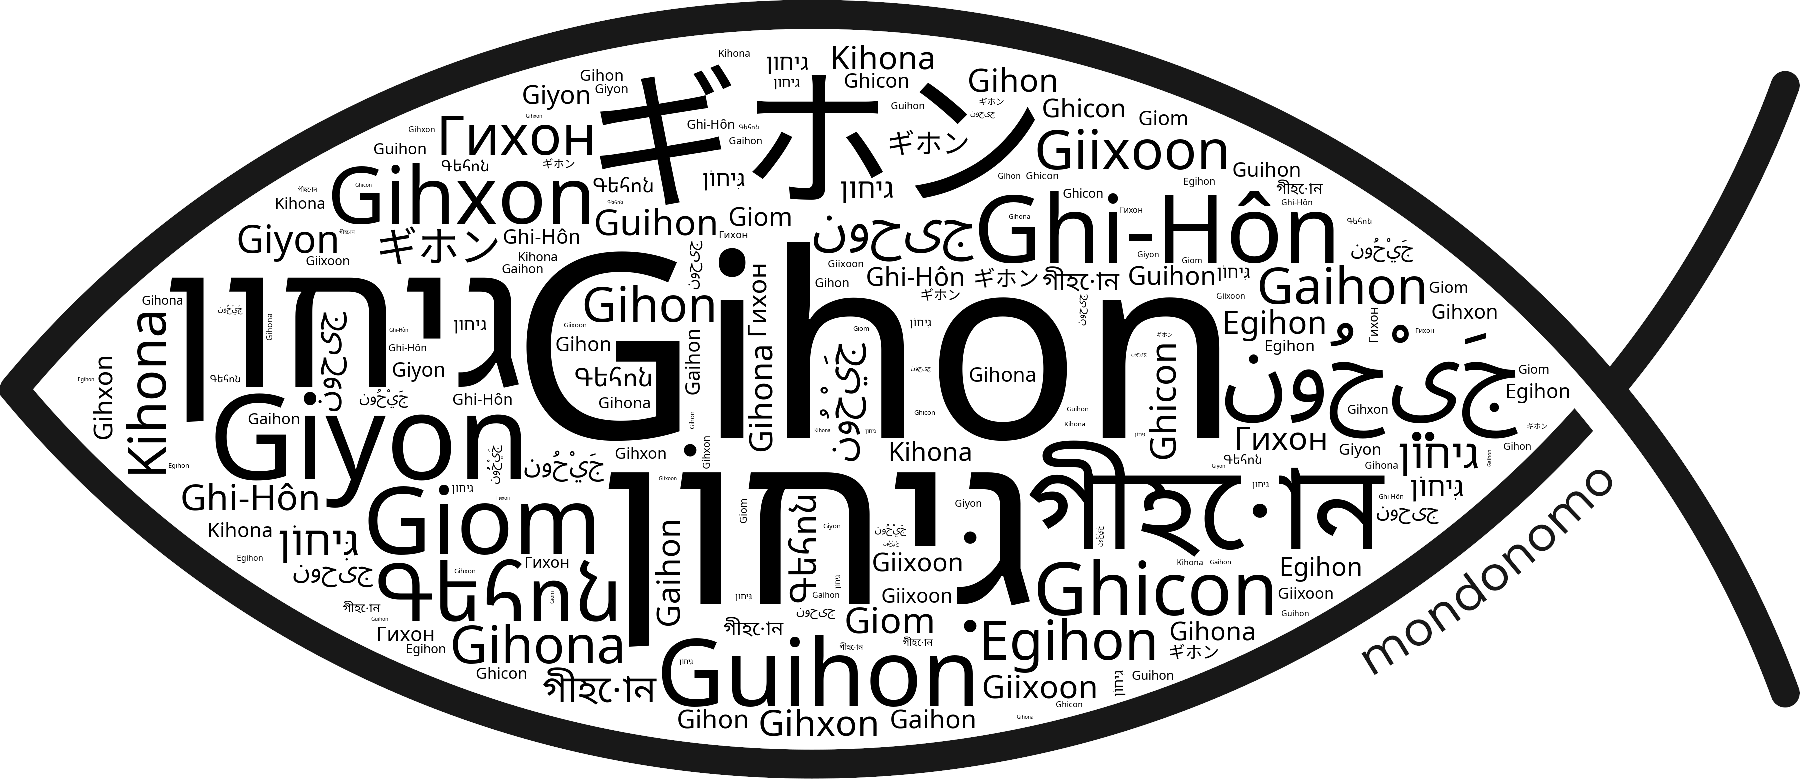 Name Gihon in the world's Bibles